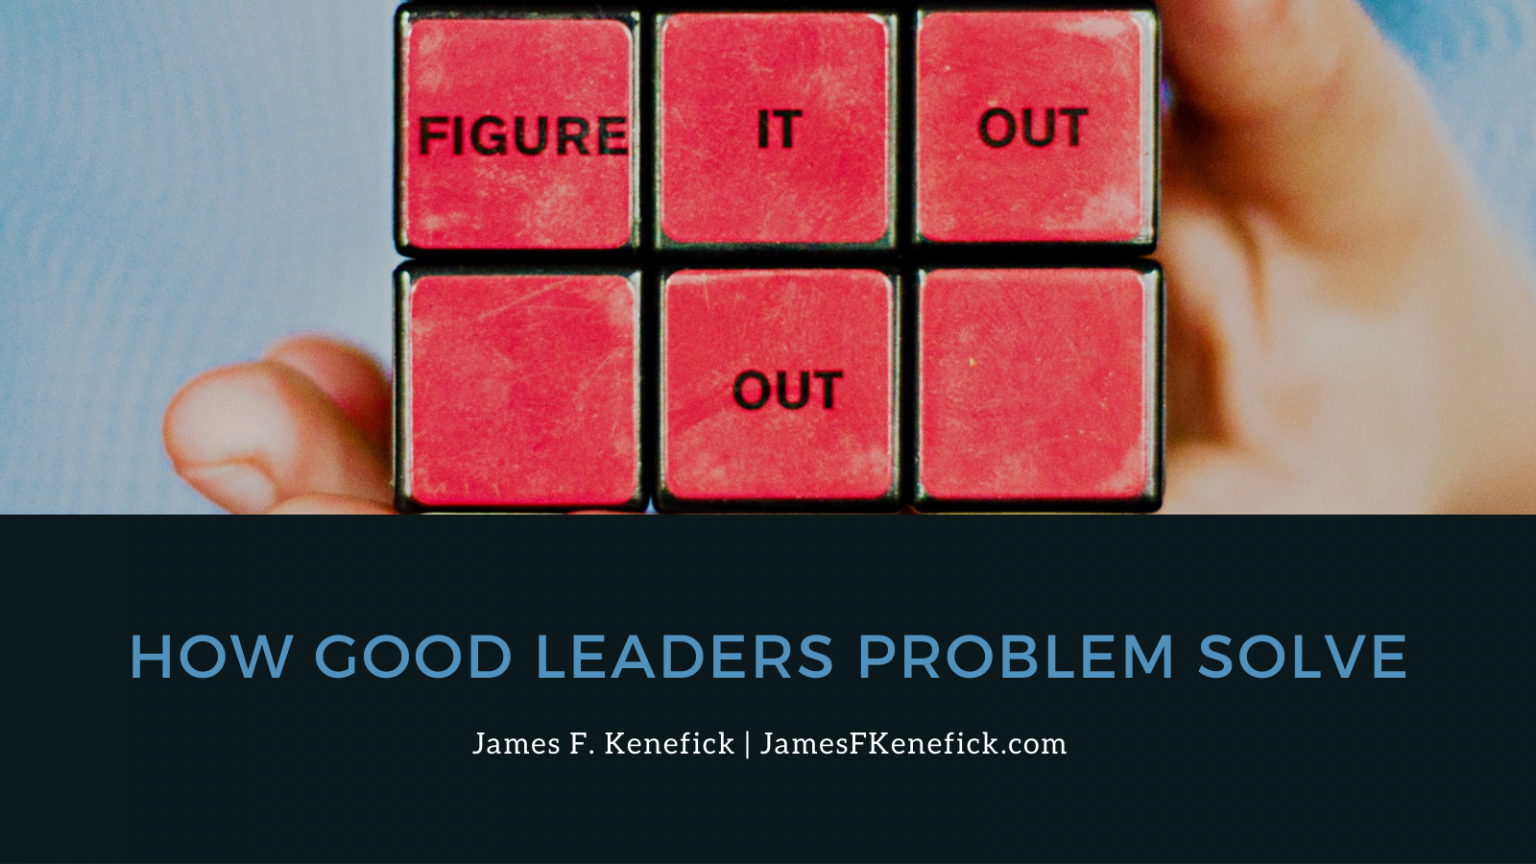 how can we solve leadership problems